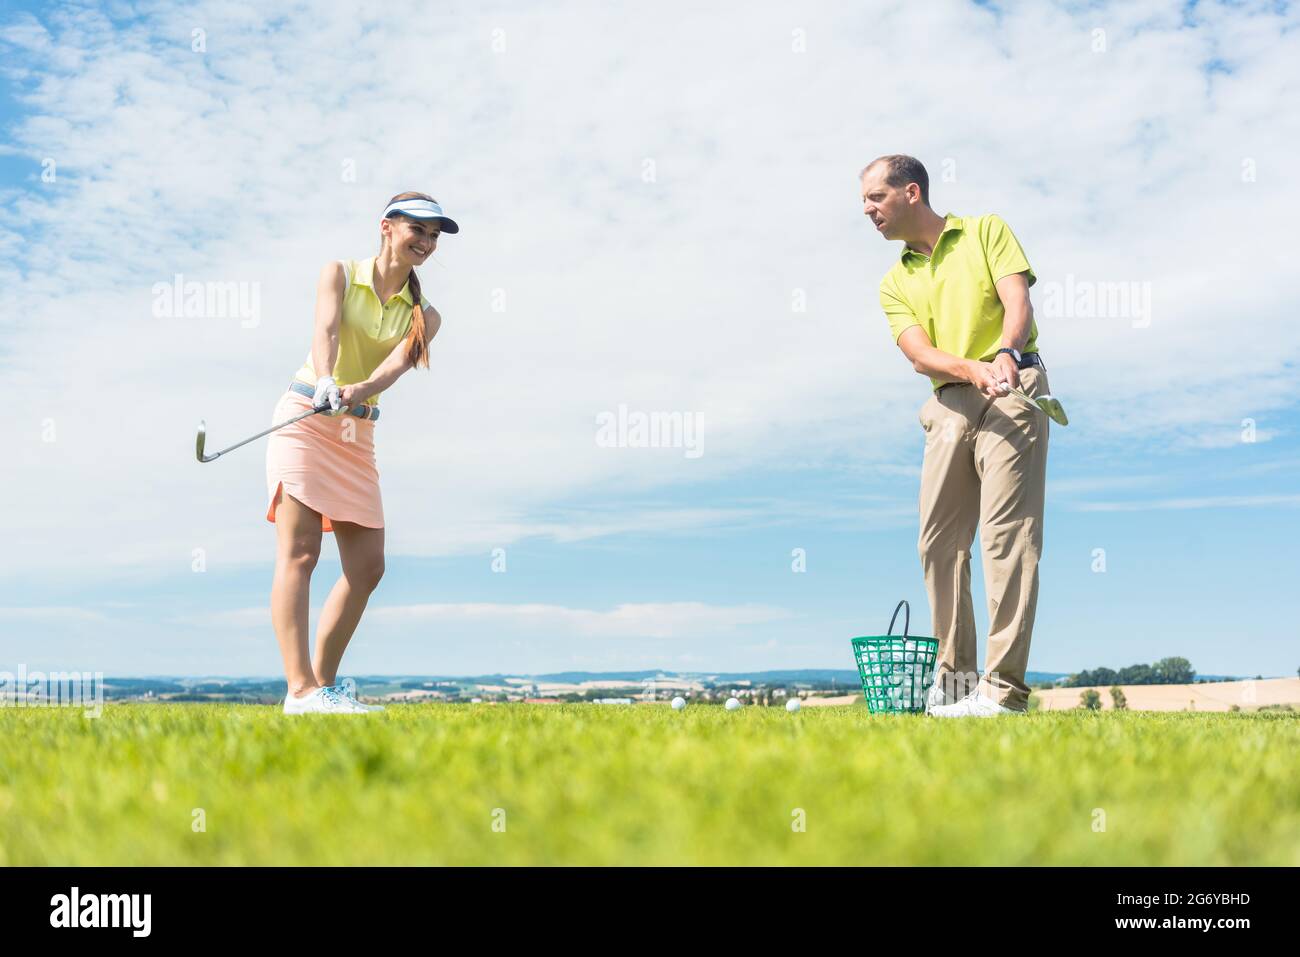 Full length of a young woman smiling while practicing the correct move for striking during golf class with a skilled professional player outdoors Stock Photo